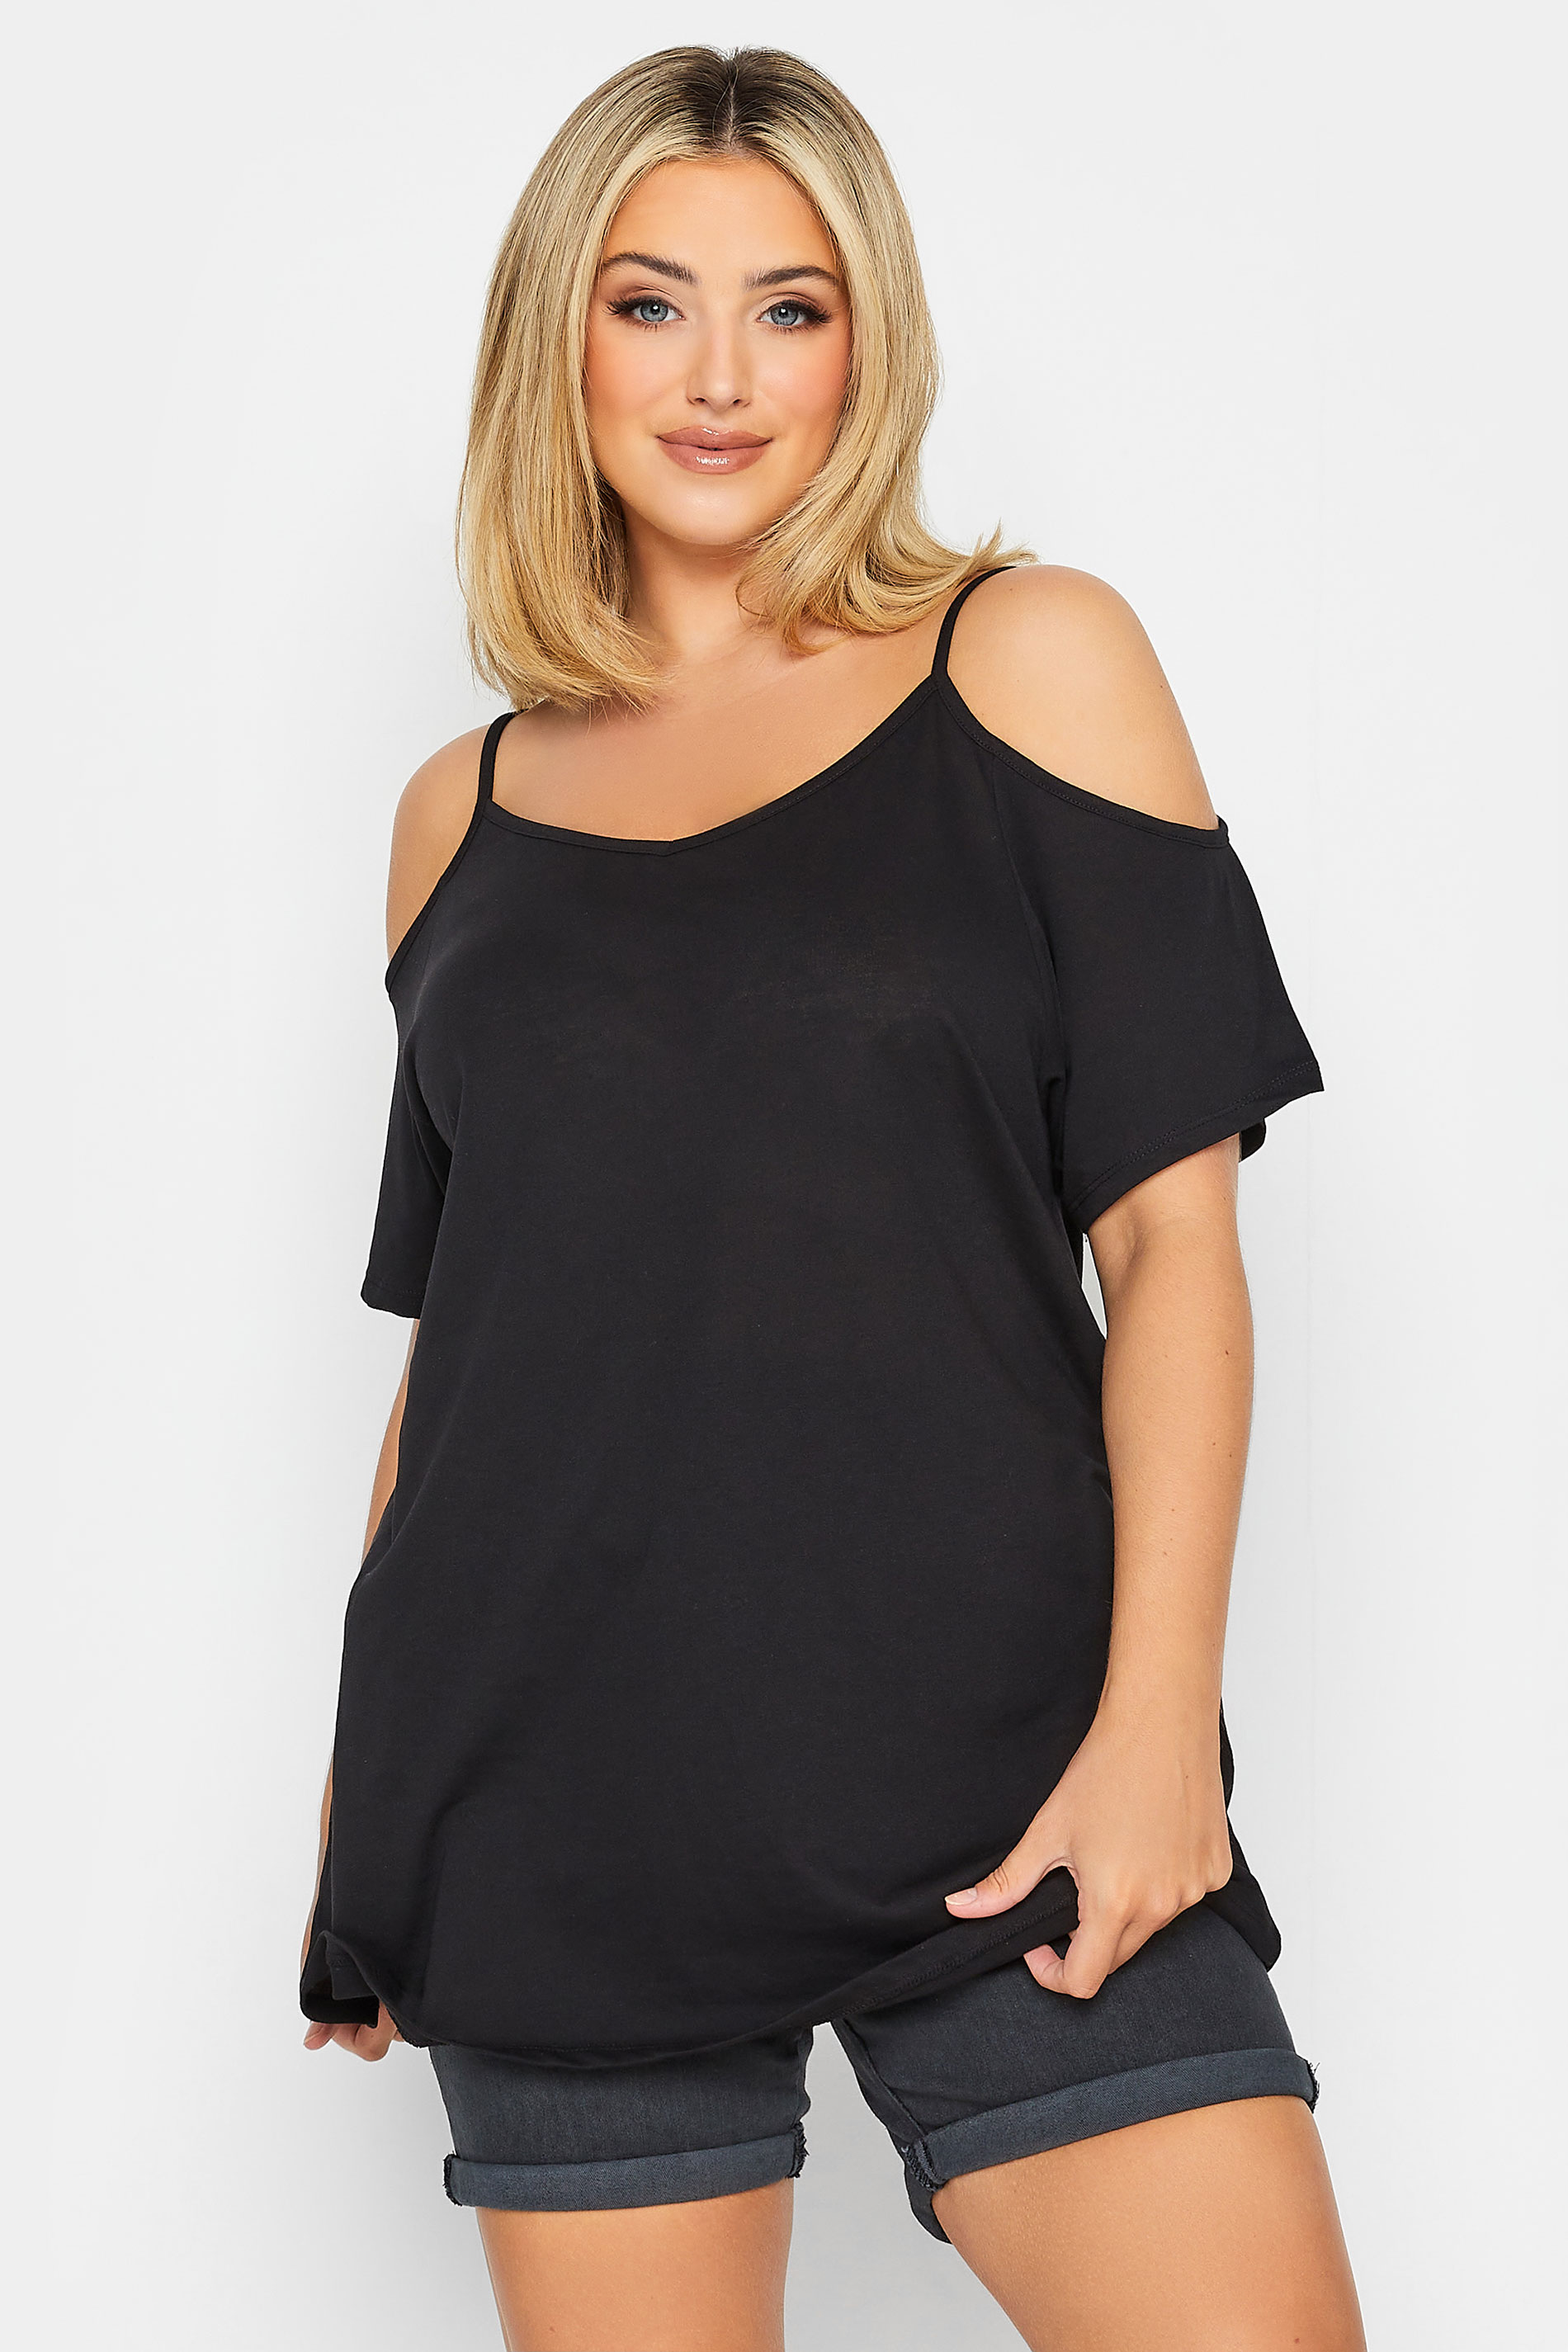 YOURS Plus Size 2 PACK Black Printed Cold Shoulder T-Shirts | Yours Clothing  3